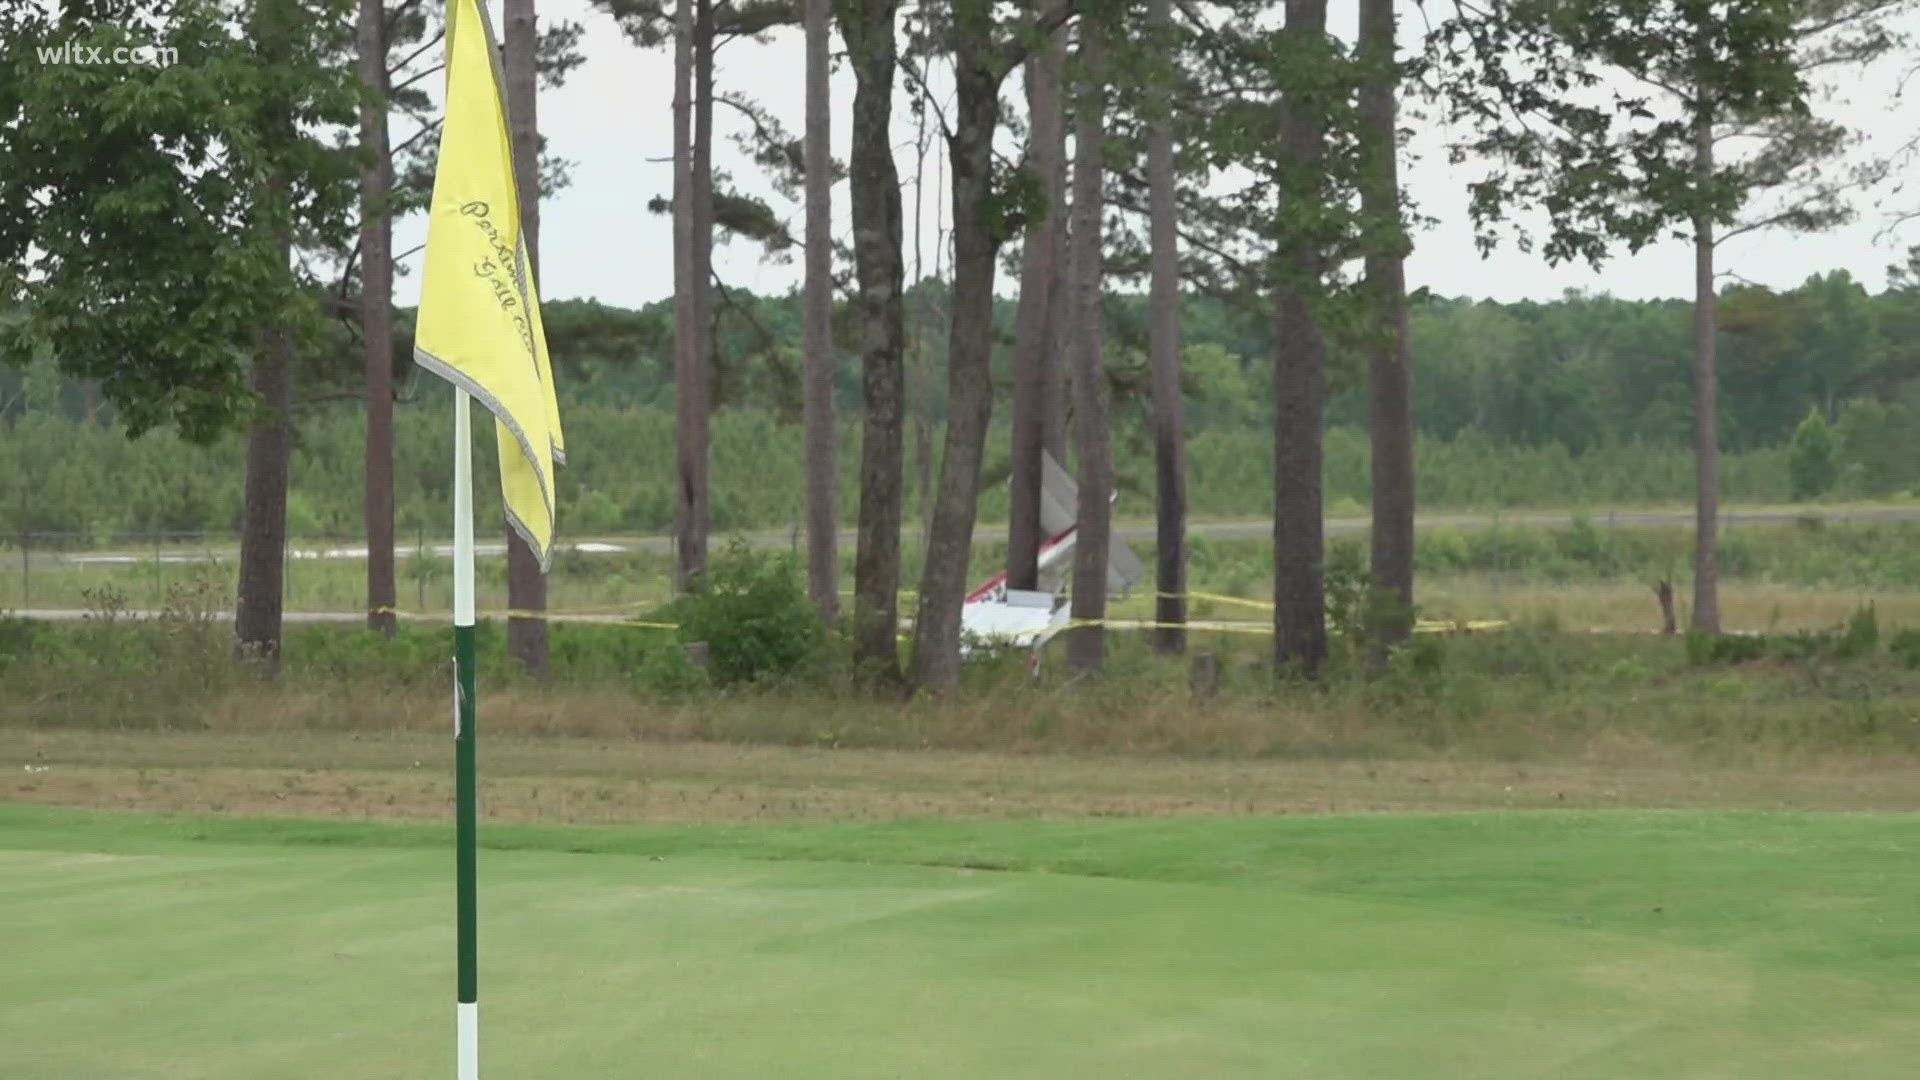 The plane crashed just feet away from golfers playing a round of golf.